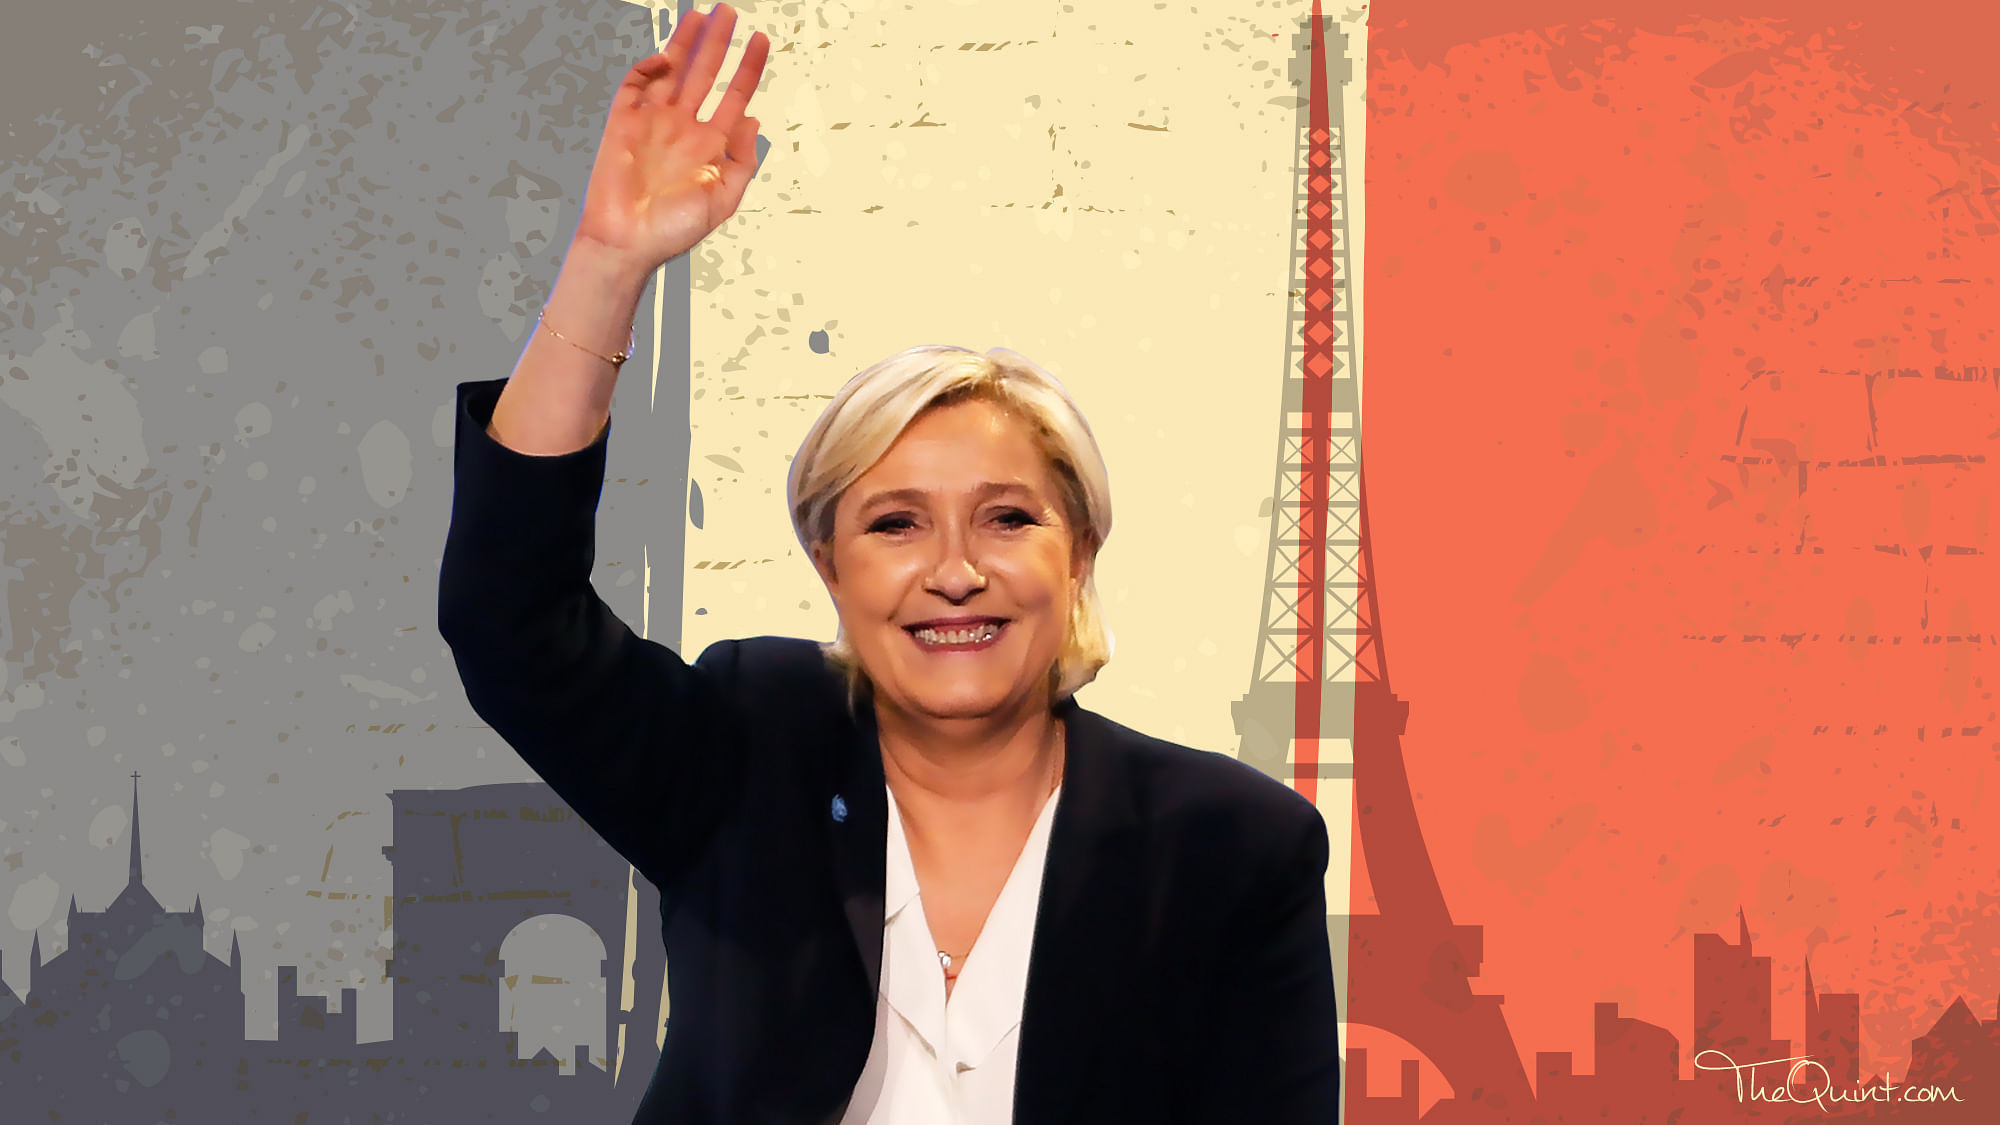 <div class="paragraphs"><p>As the economic impact of the war in Ukraine looms over French voters, Marine Le Pen’s social-populist appeal may give her a boost in the battle over second place that is taking place to the right of France’s presidential politics, despite her prominently <ins><a href="https://www.theguardian.com/world/2022/mar/02/french-far-right-leader-marine-le-pen-forced-to-defend-putin-links">pro-Russian stance</a></ins> prior to the invasion. </p></div>